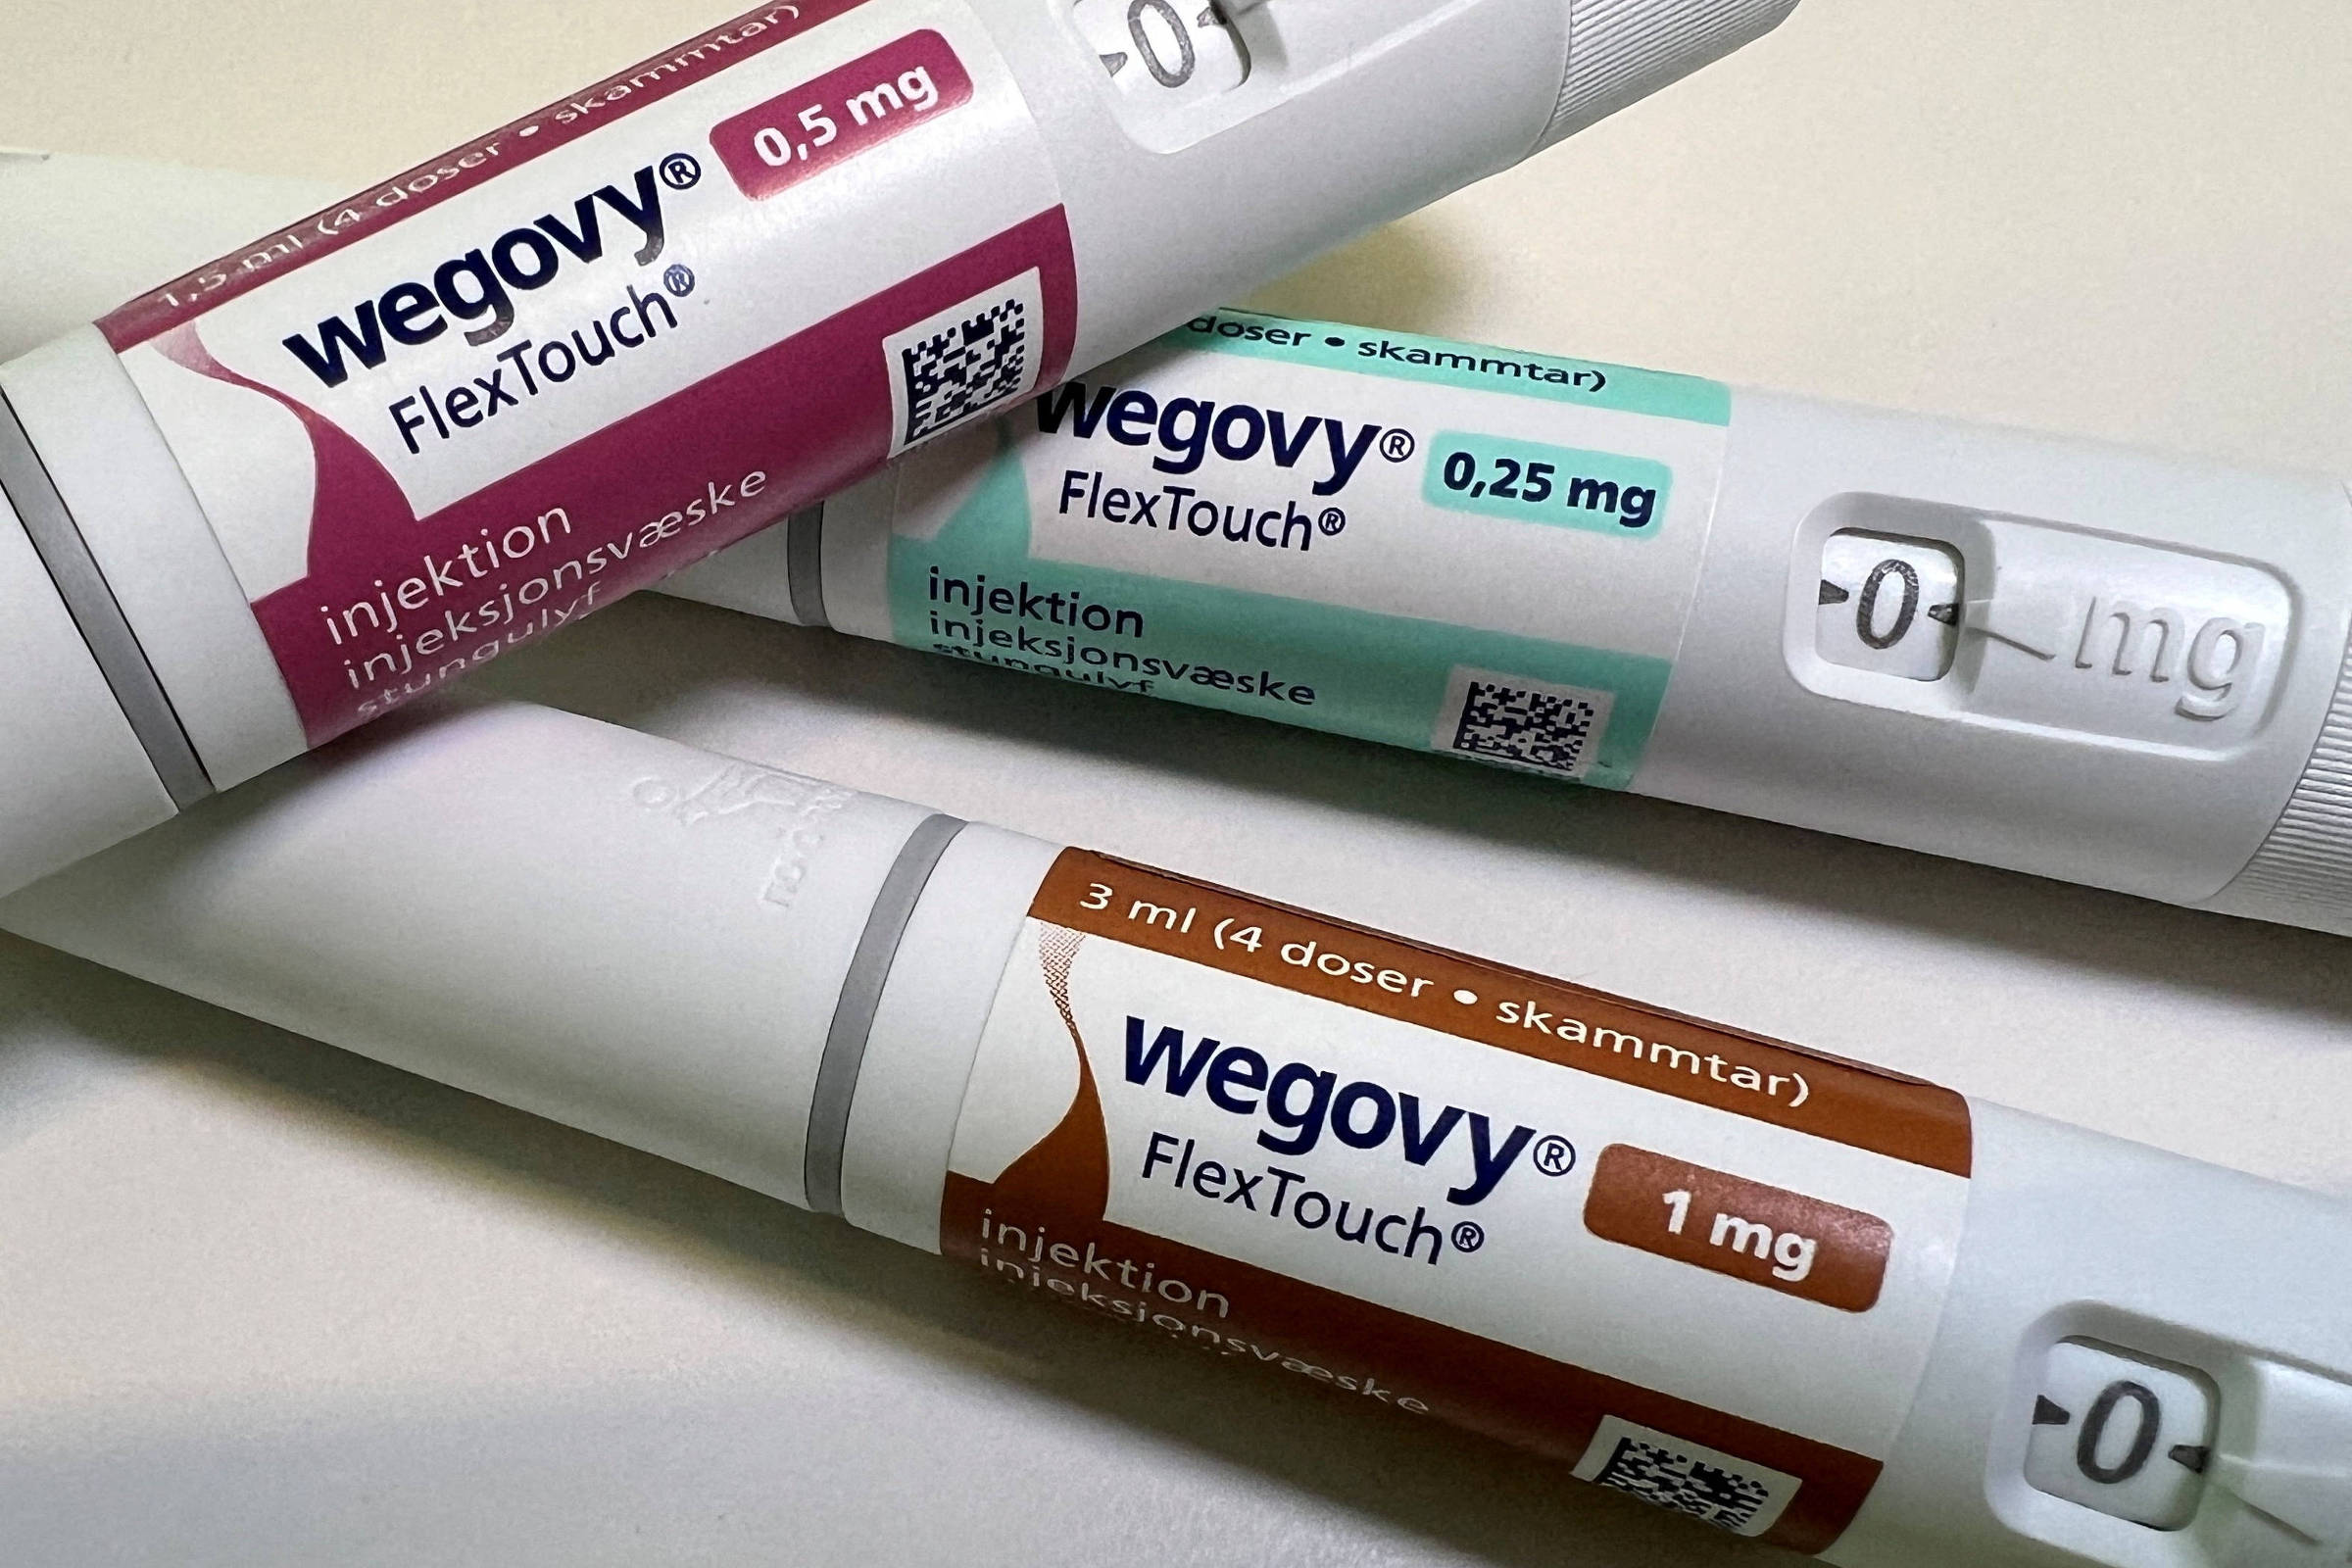 Adherence to Wegovy is greater than to other weight loss medications